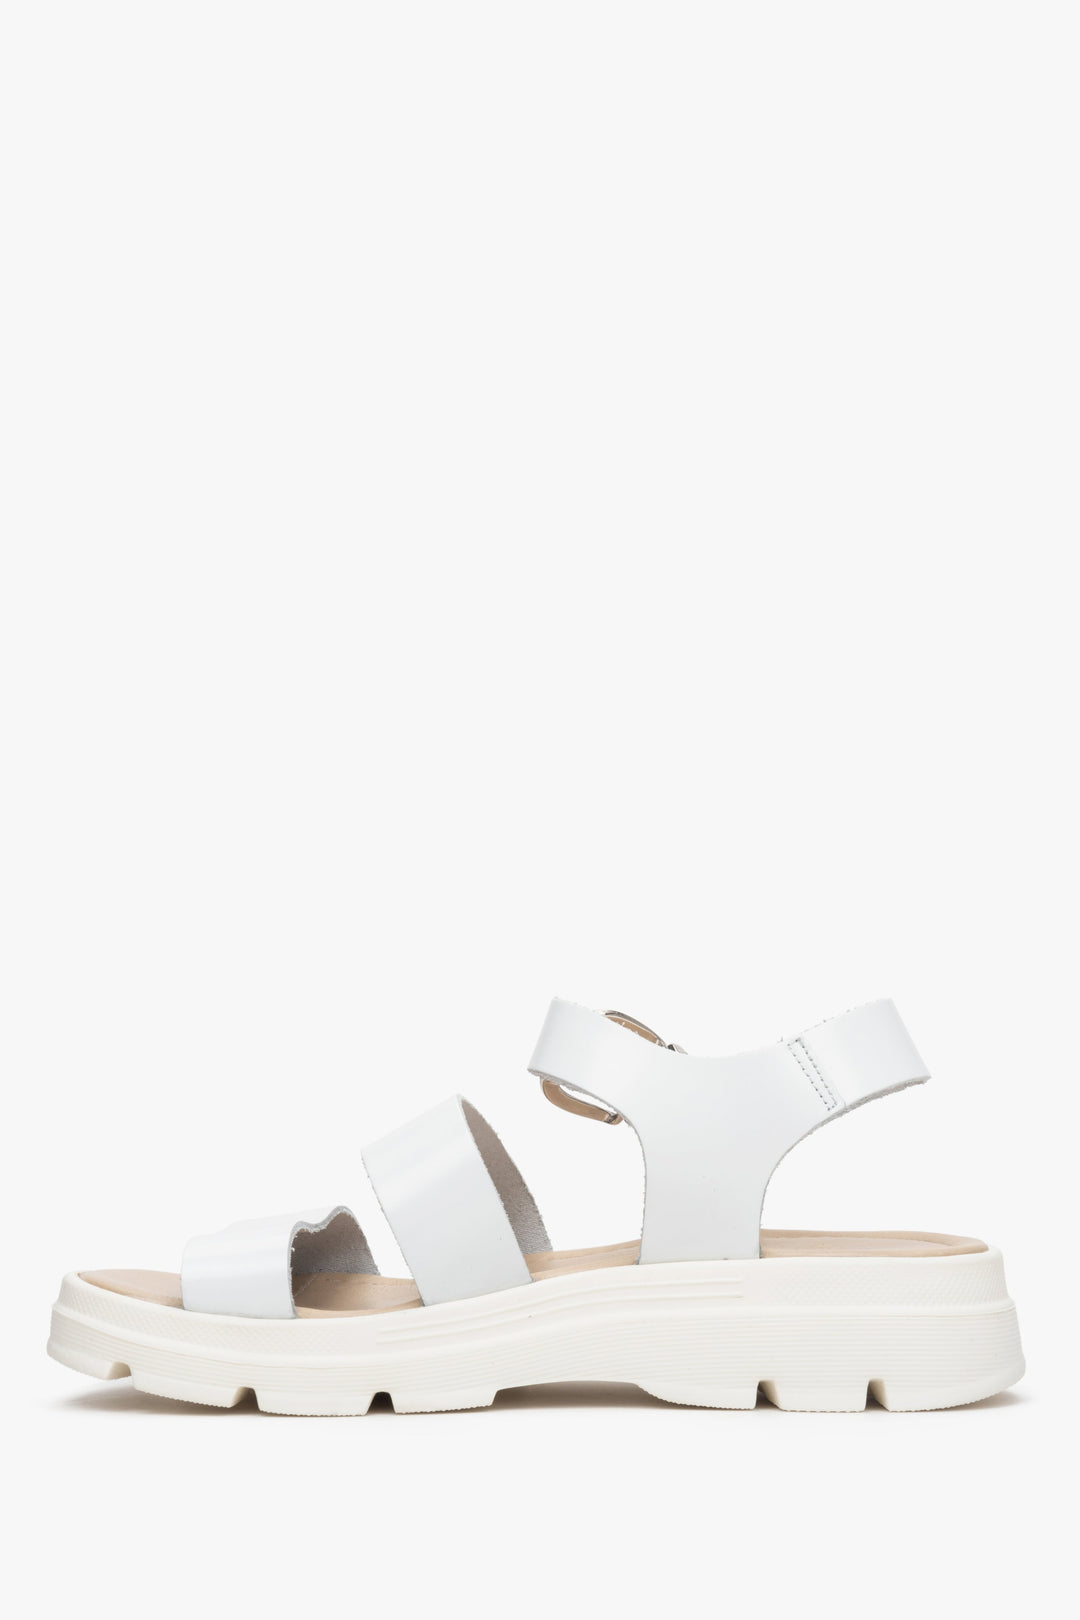 Estro women's thick strappy sandals on a natural leather platform, white.